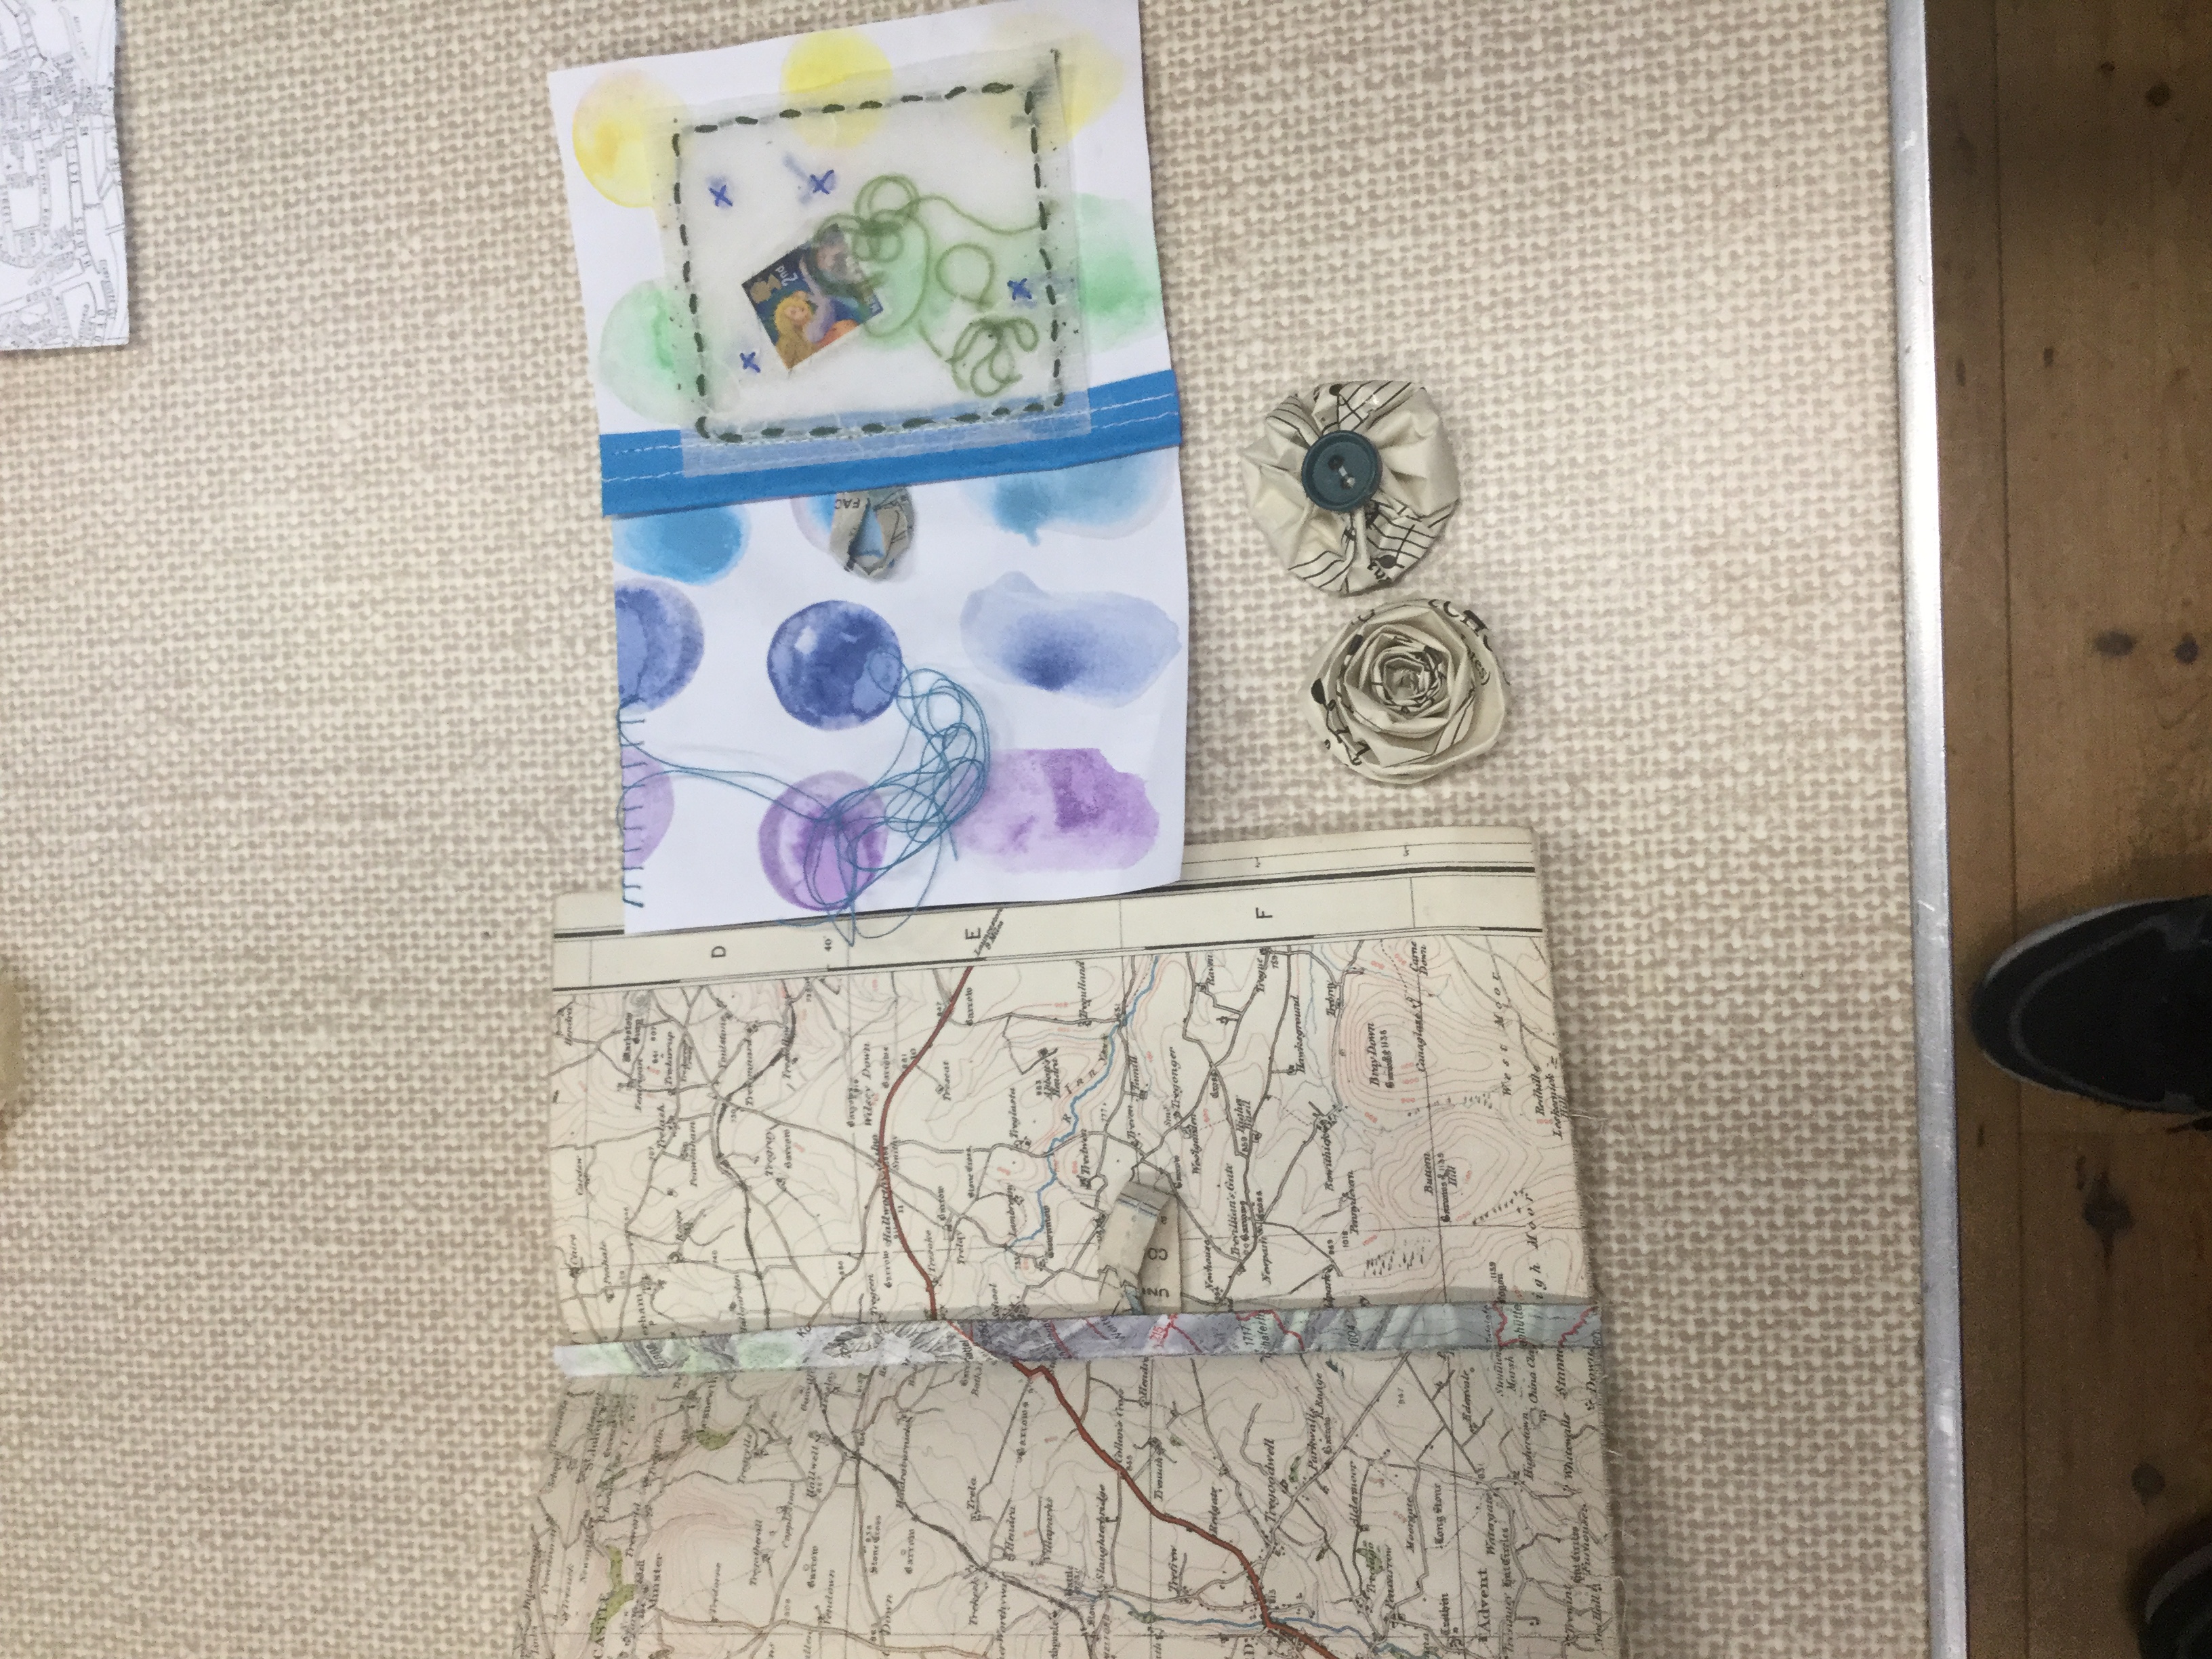 Paper samples with Jennifer Collier